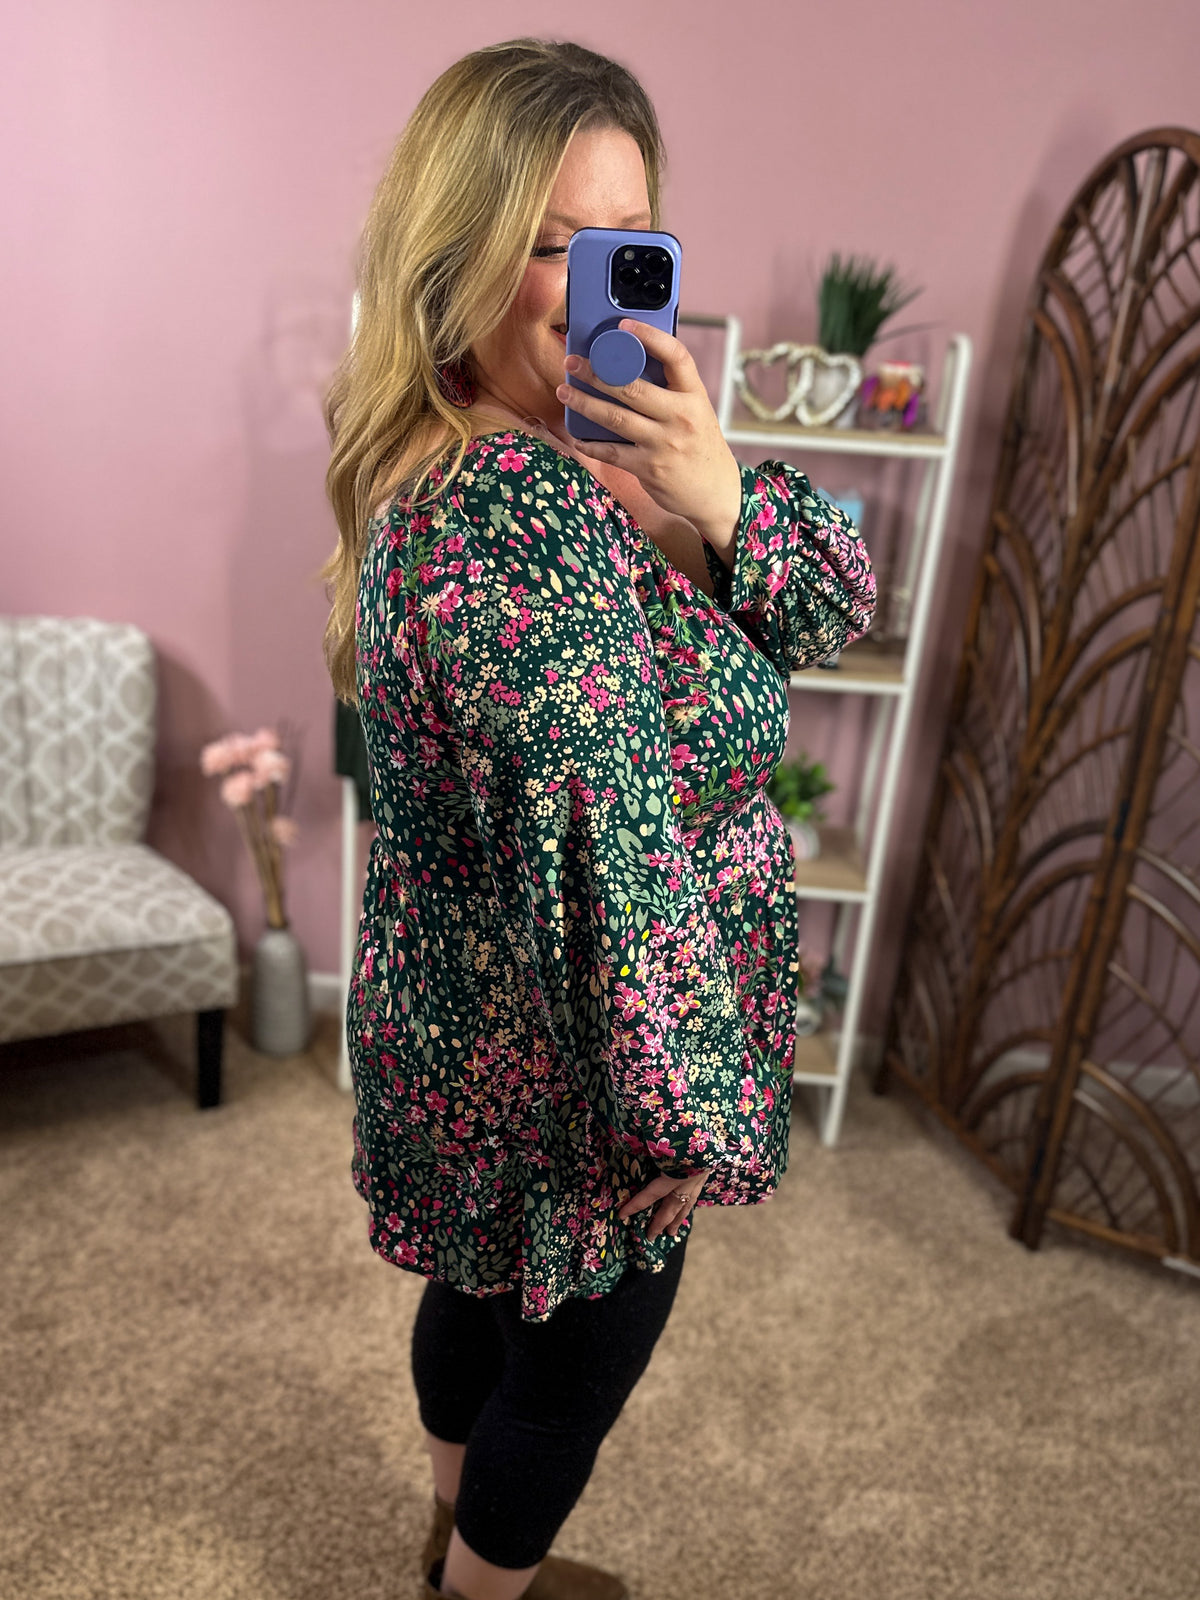 Classy Chic Peasant Top - Ditzy Pink and Hunter